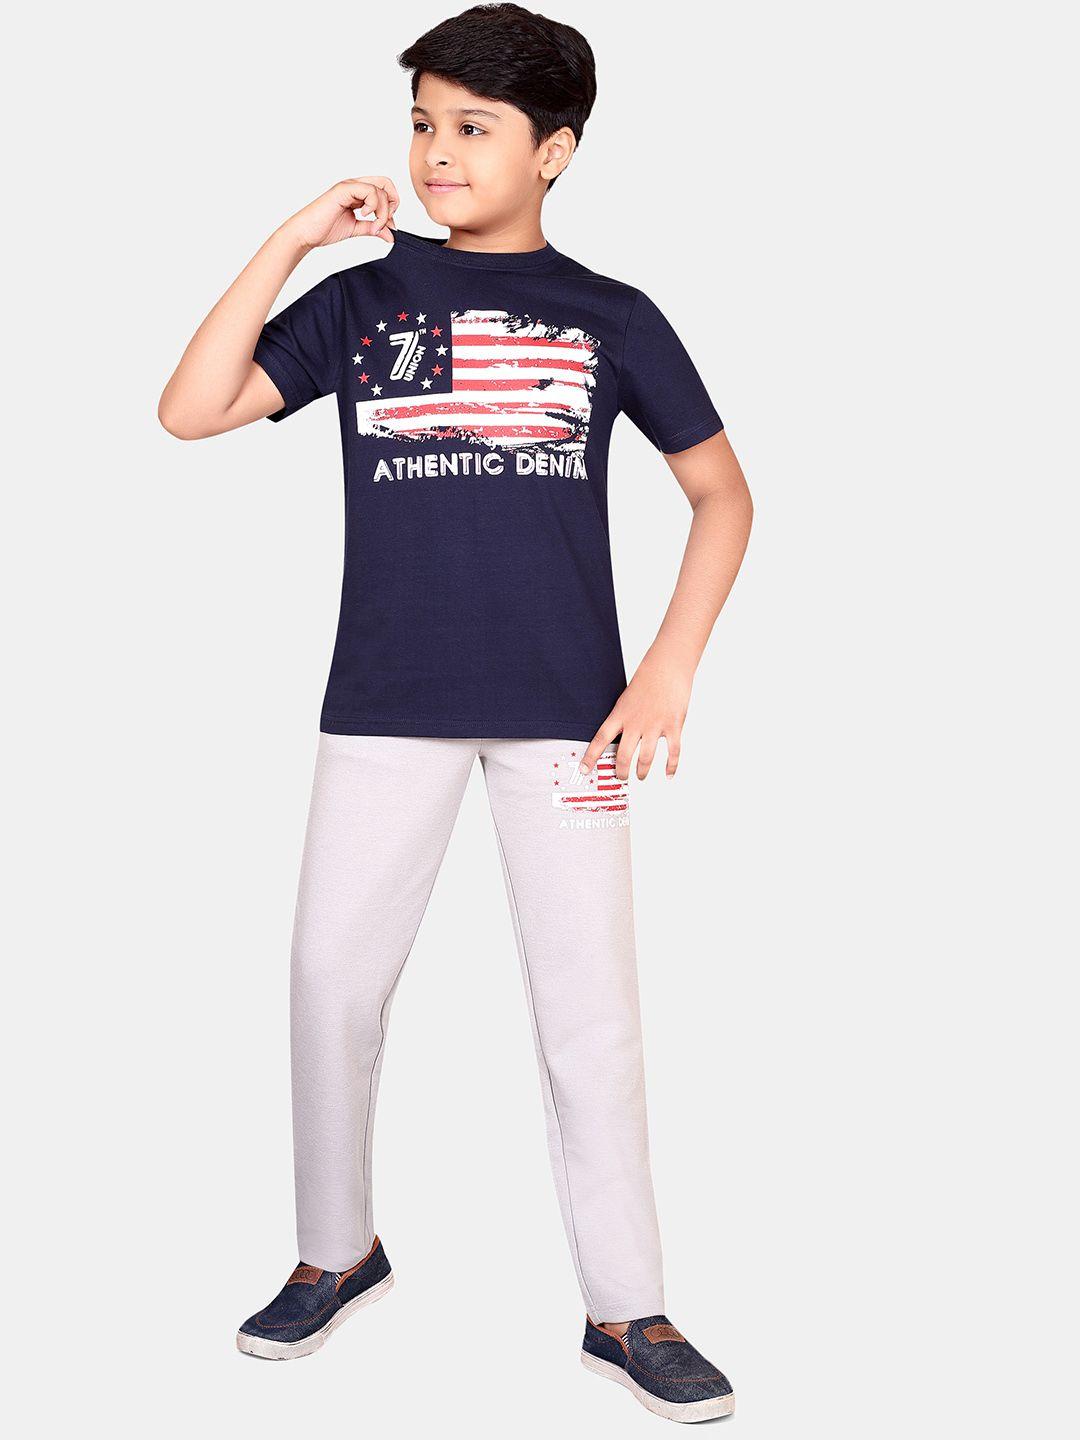 baesd boys printed pure cotton t-shirt with trousers